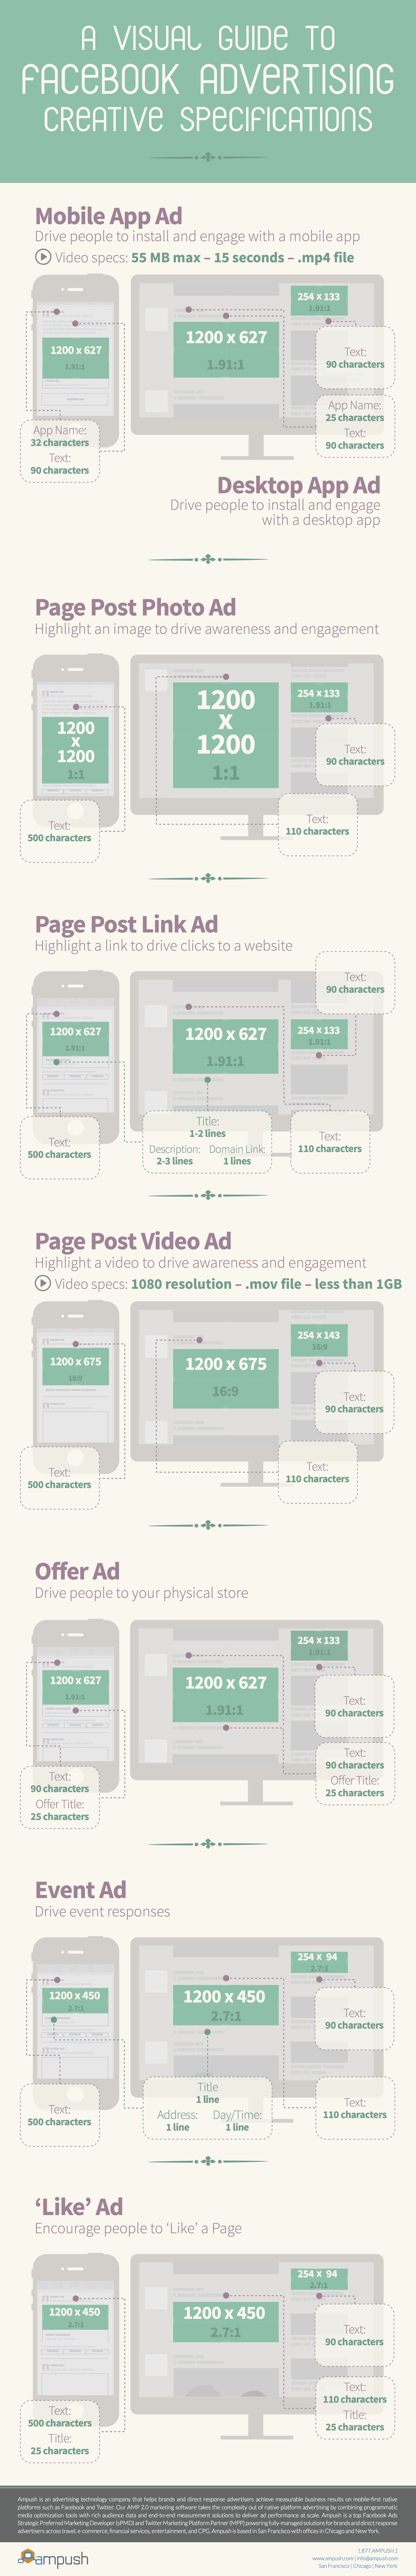 Infographic: A visual guide to Facebook’s ad creative specifications 2014